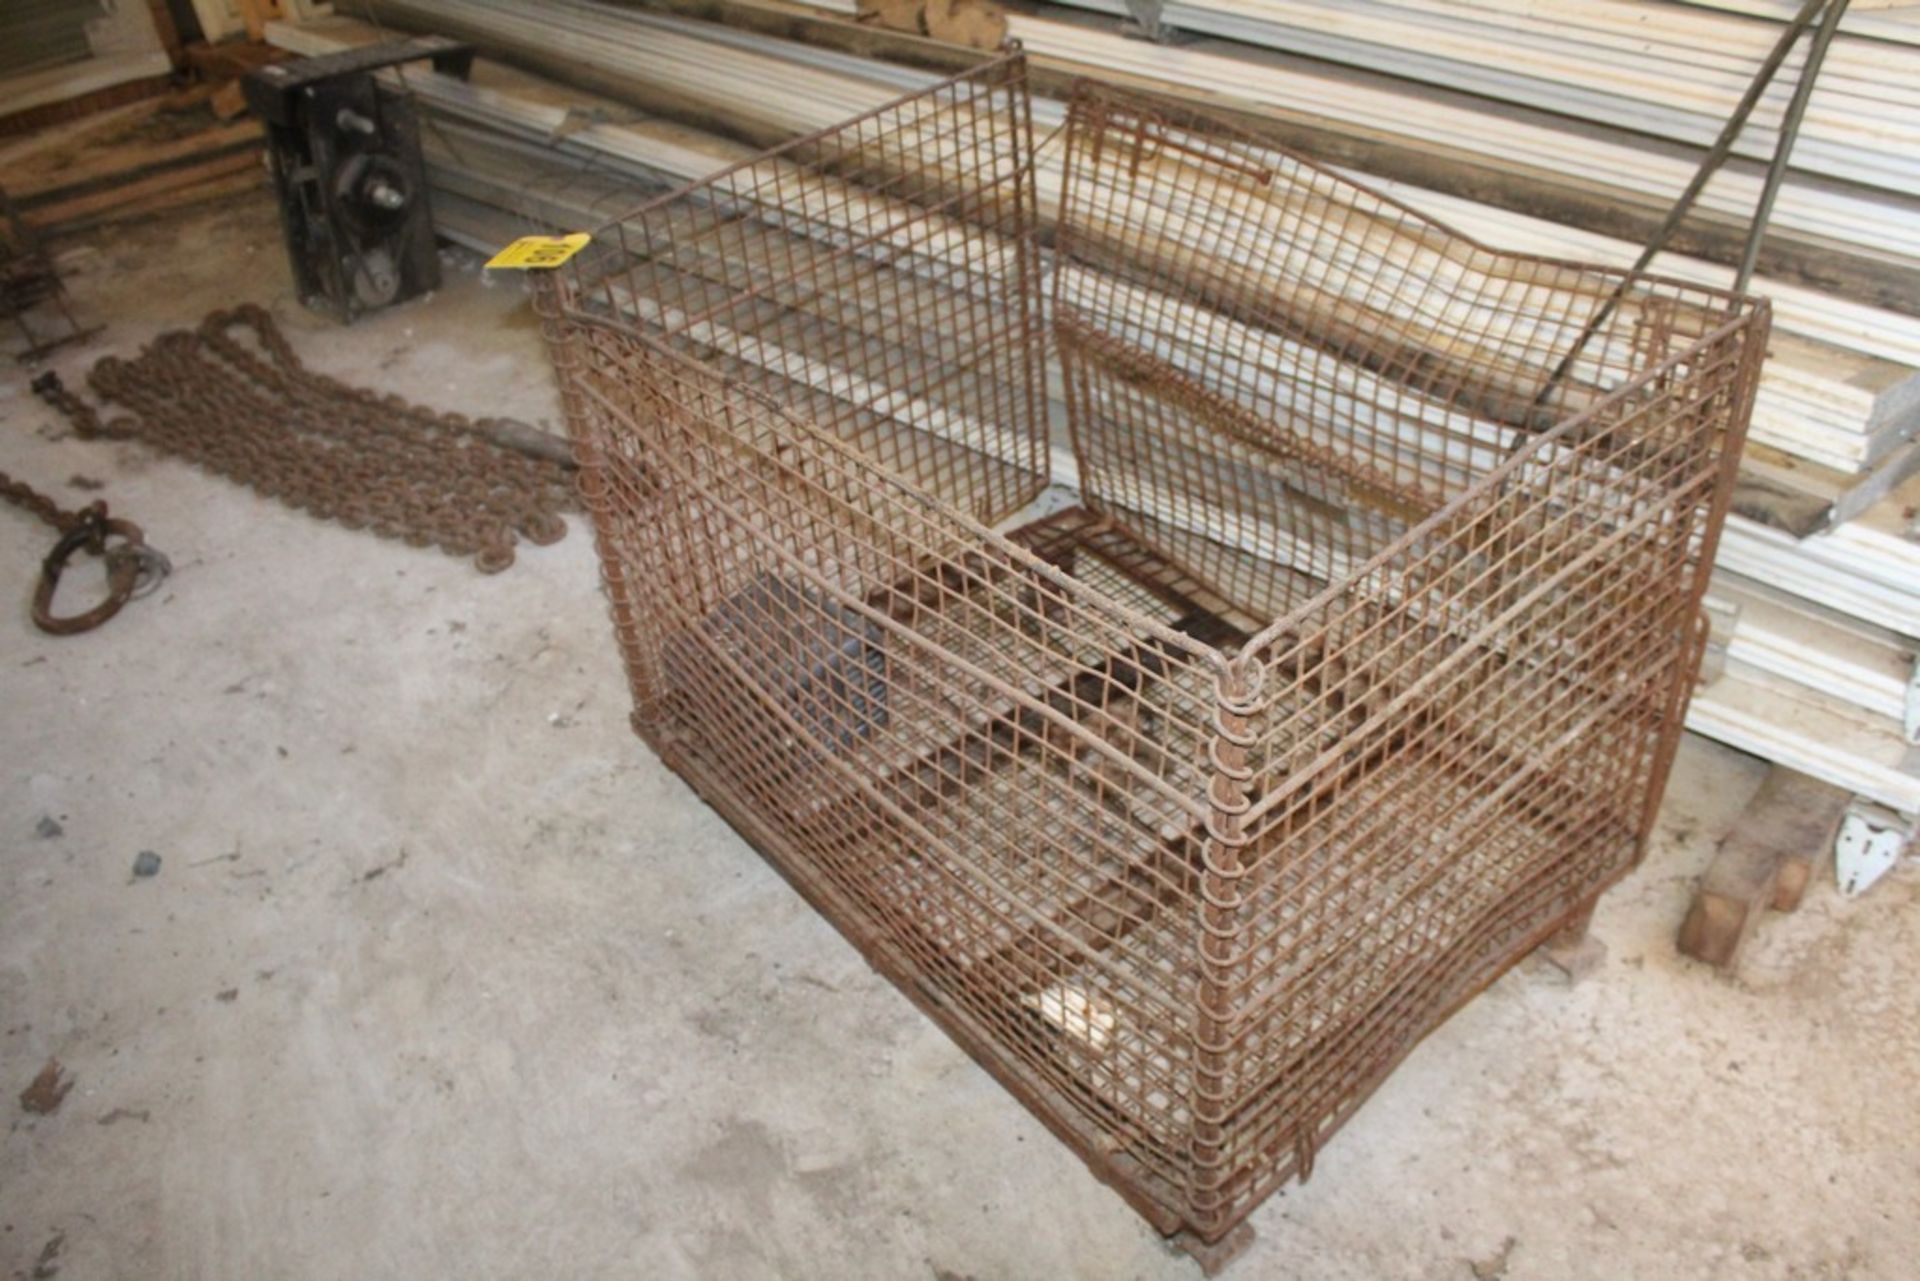 FORKLIFTABLE WIRE CRATE 36" X 30" X 30"